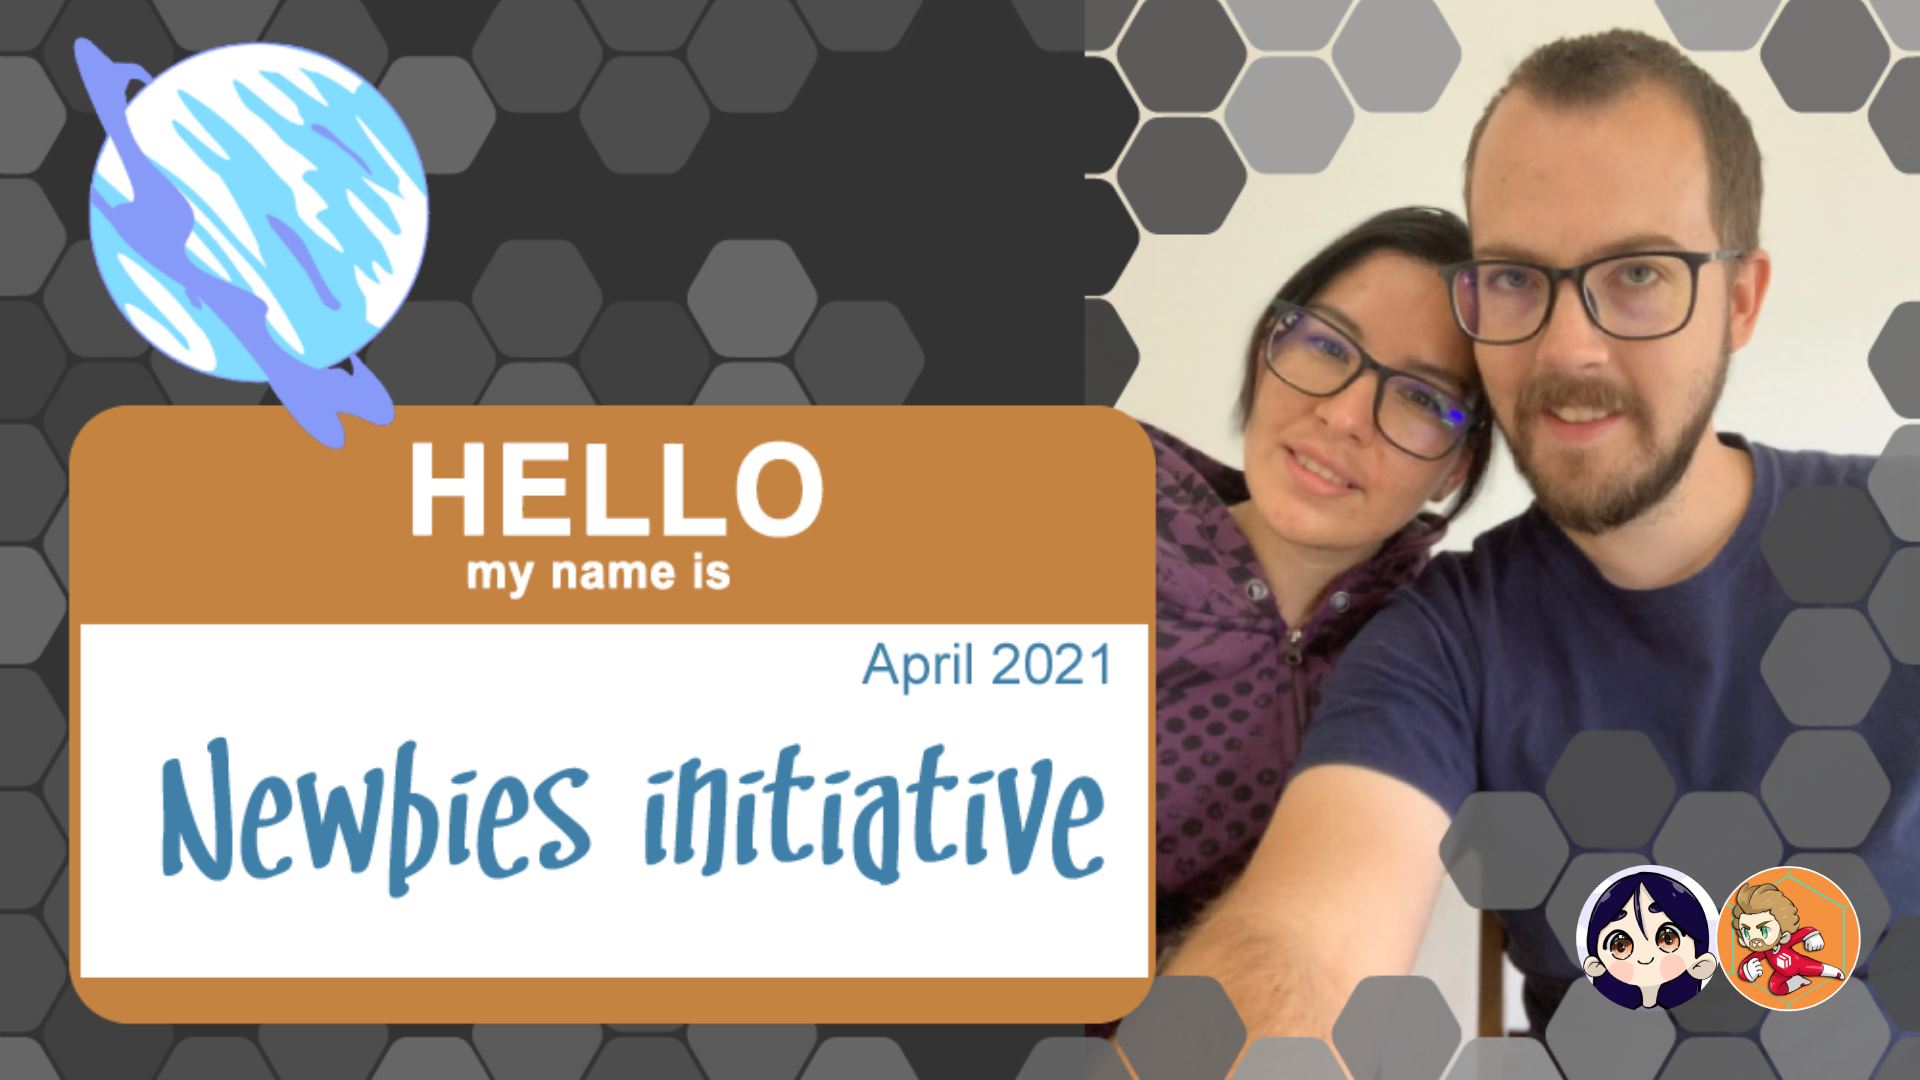 @aliento/presenting-the-newbies-for-the-month-of-april-newbies-initiative